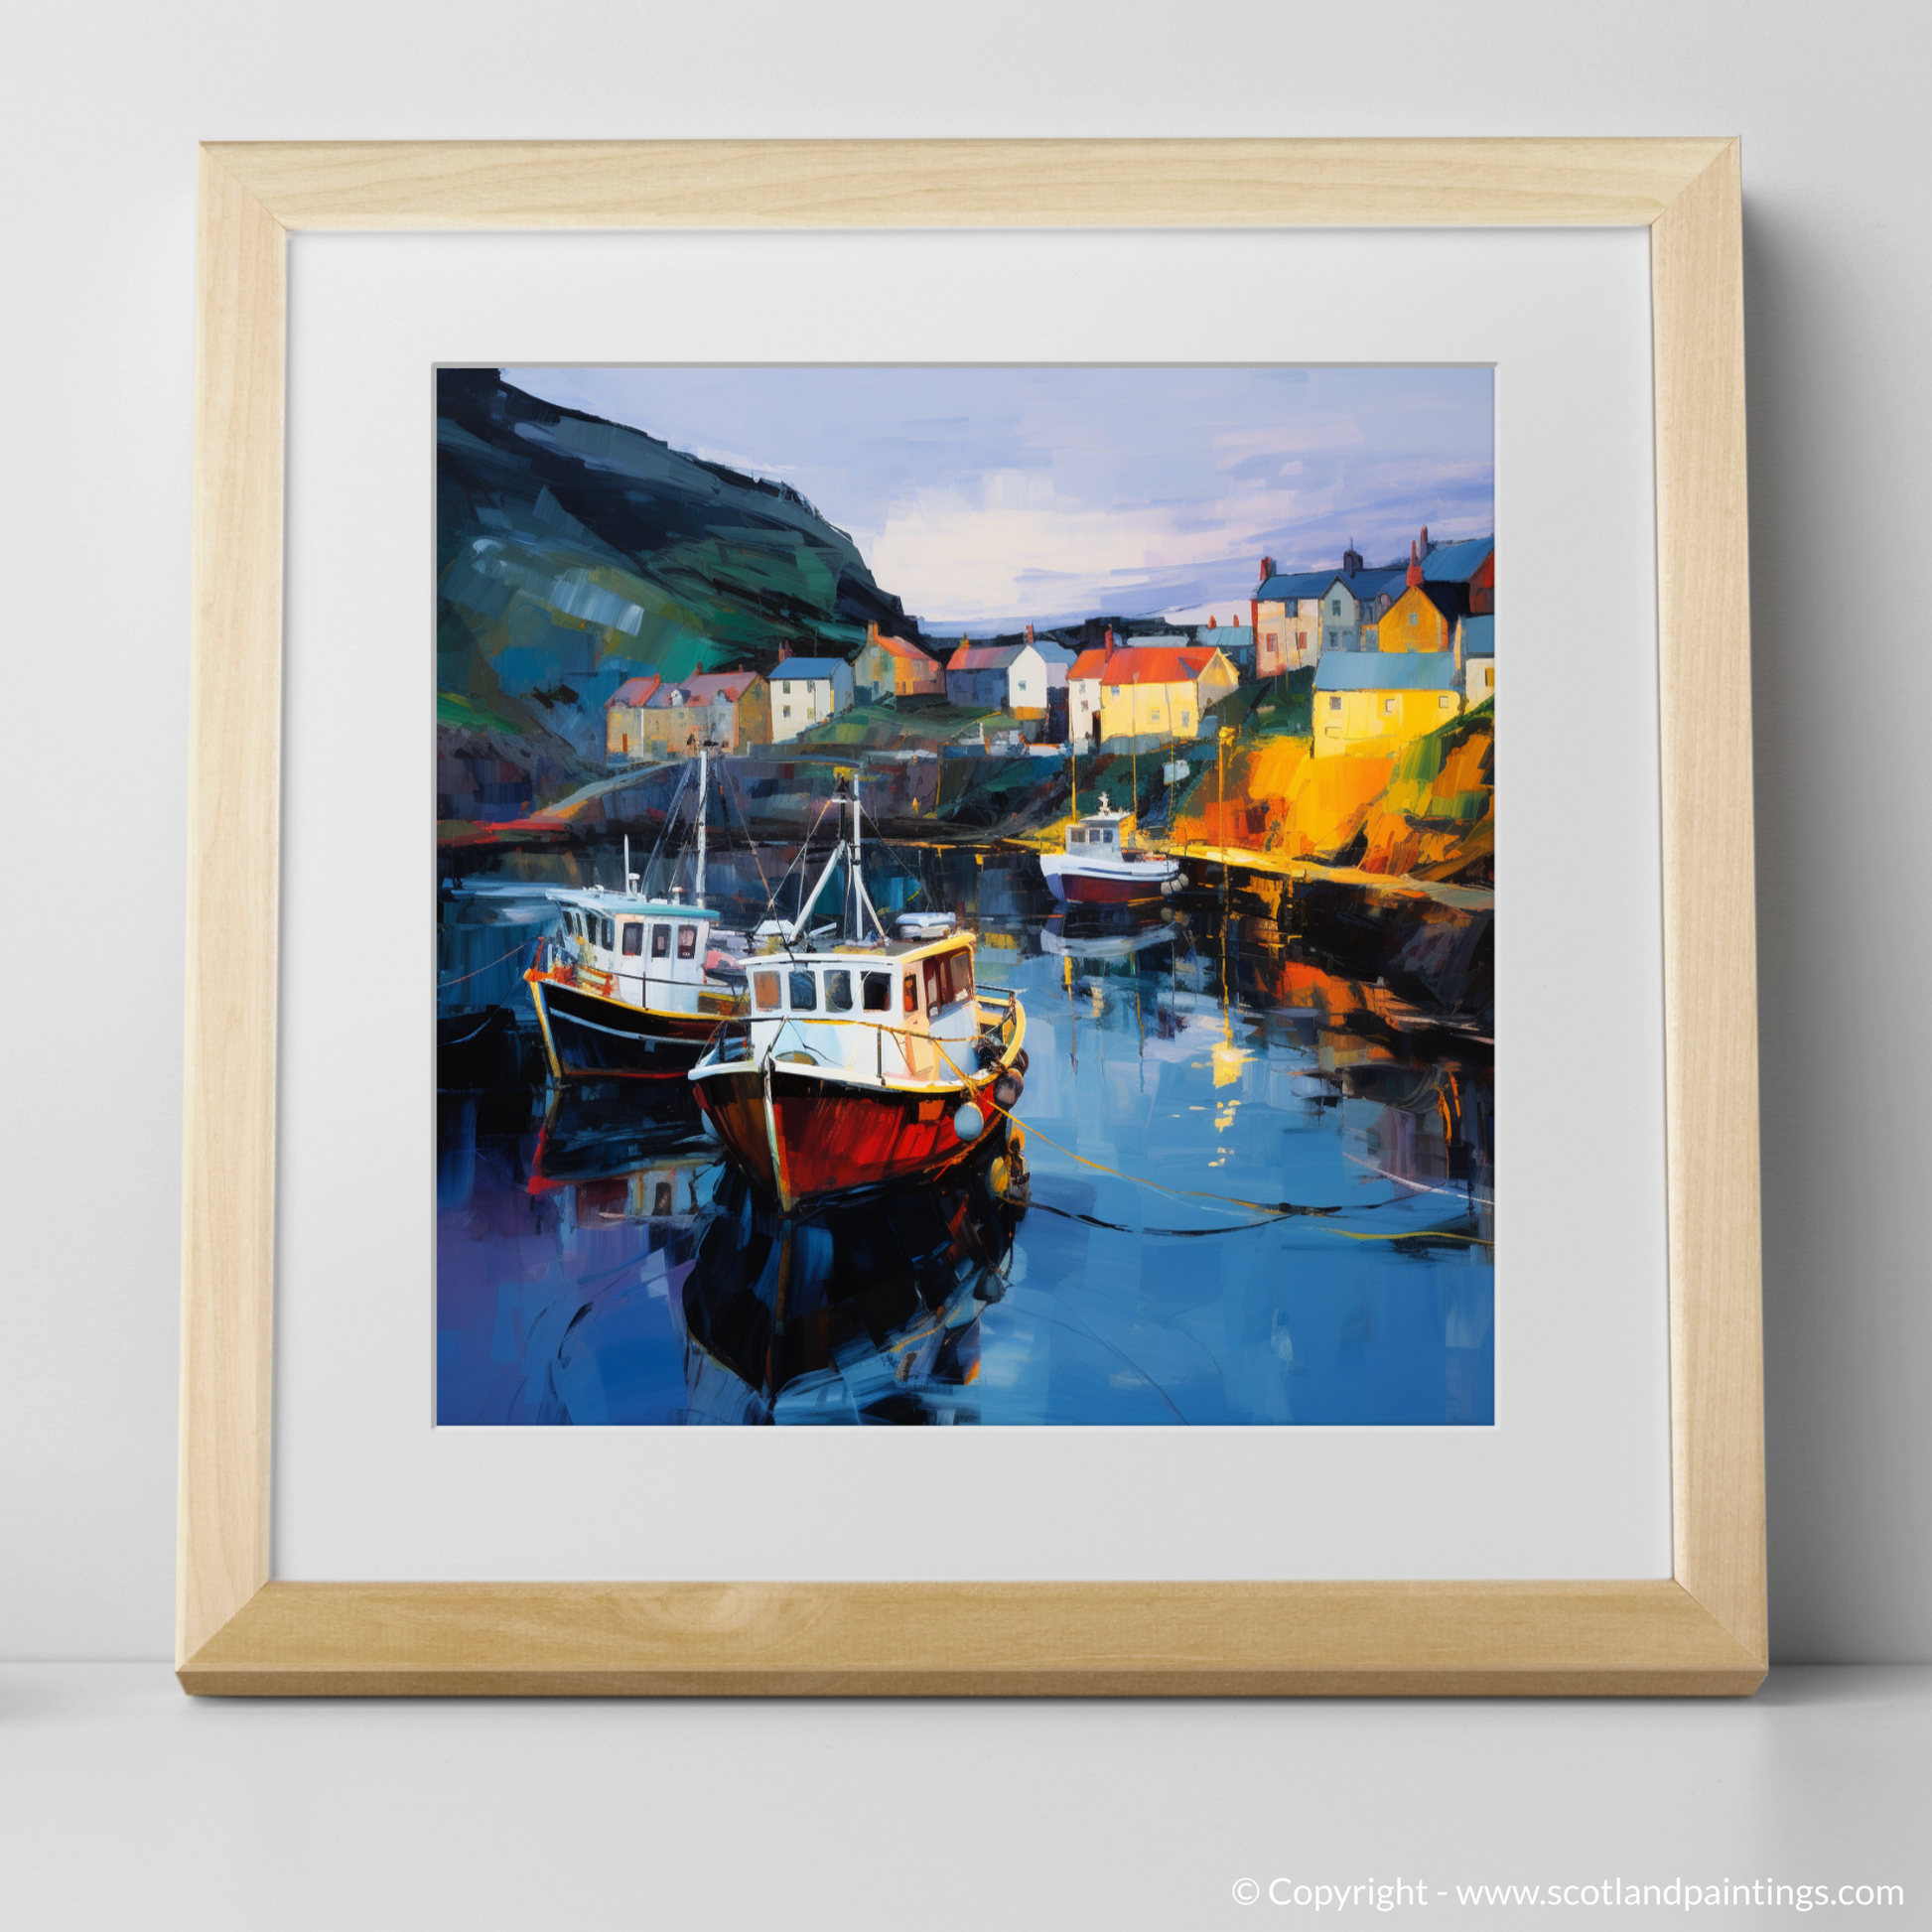 Art Print of Gardenstown Harbour at dusk with a natural frame